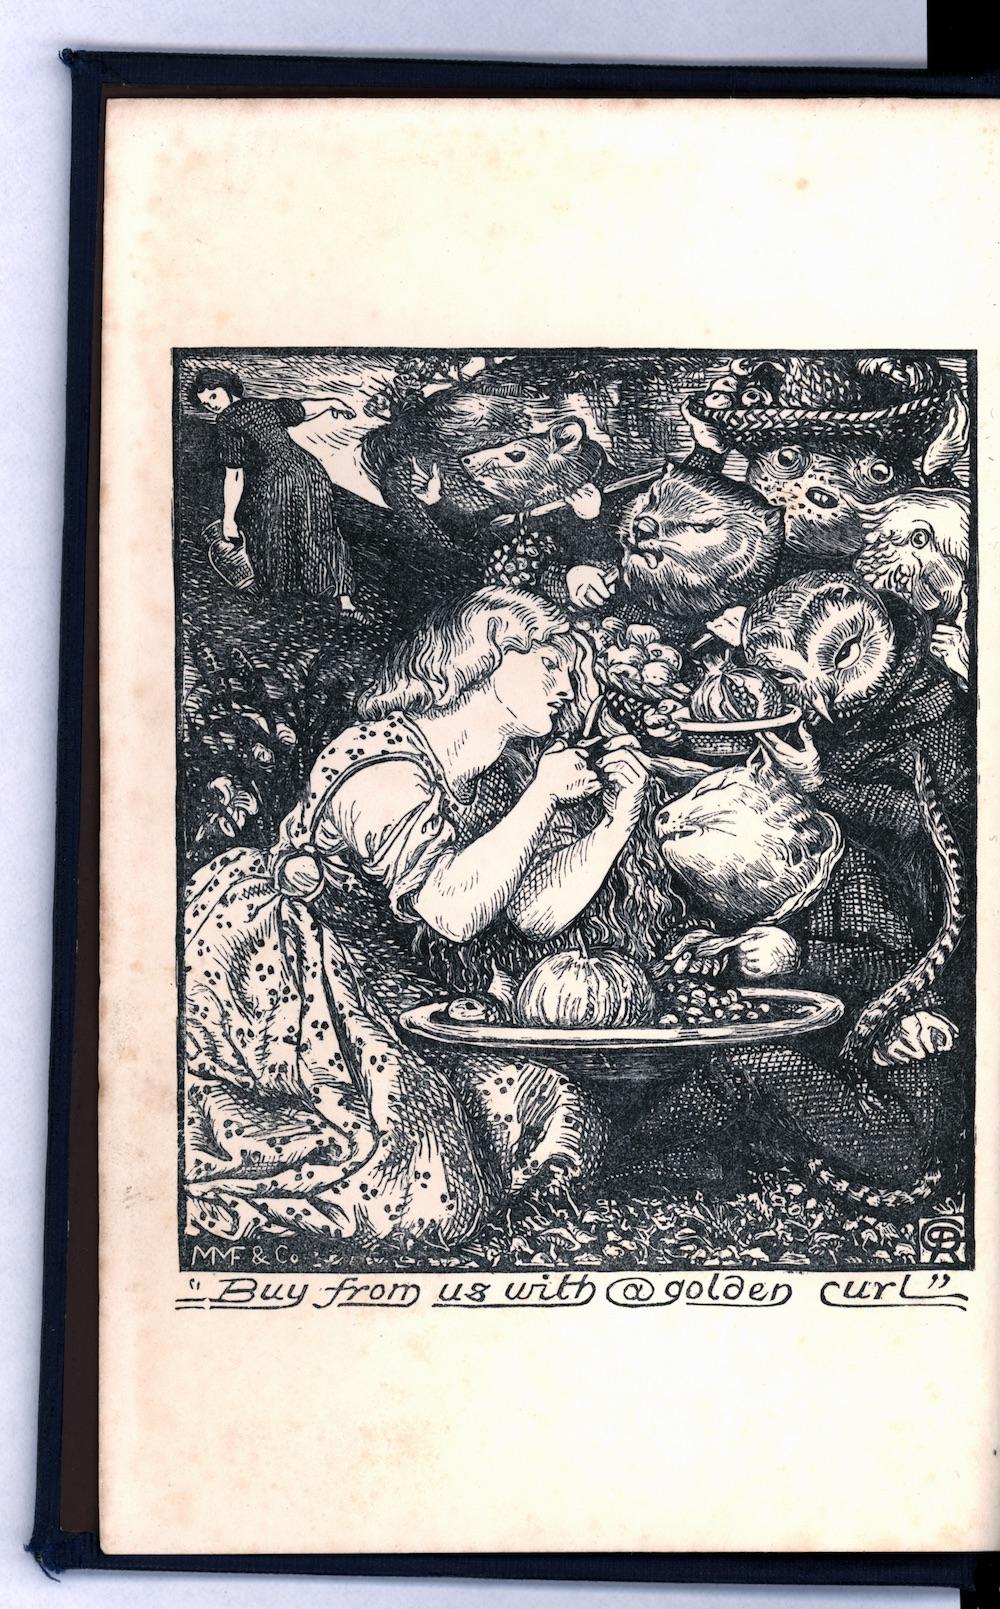 Black-and-white wood engraved image of a kneeling woman surrounded by goblins and fruit